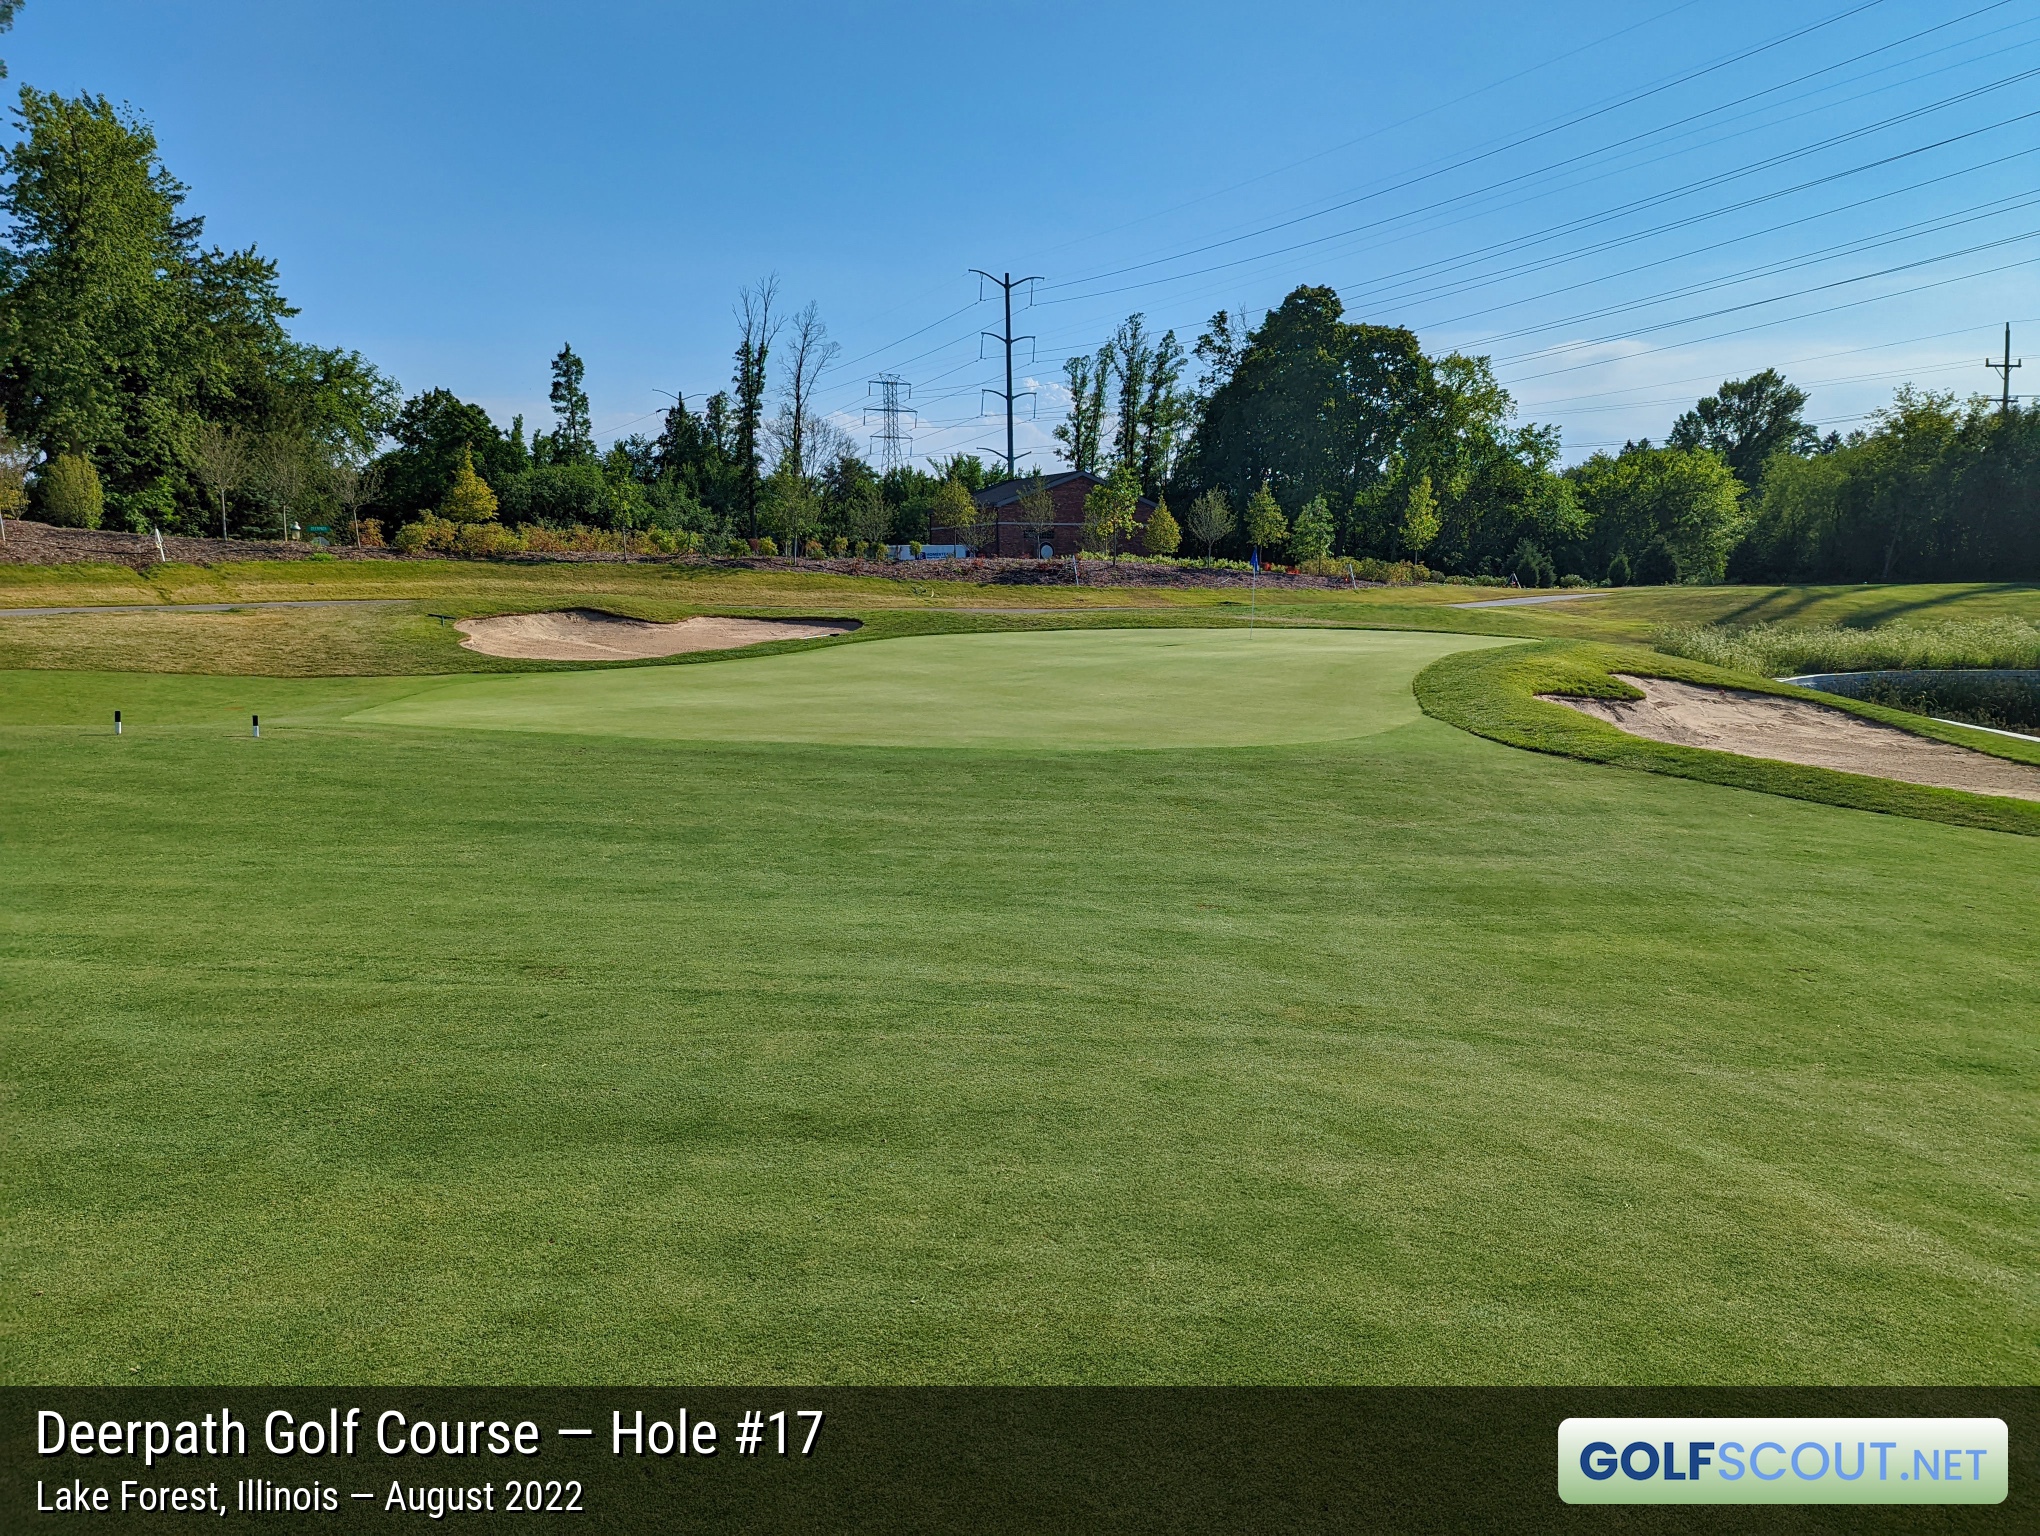 Photo of hole #17 at Deerpath Golf Course in Lake Forest, Illinois. 